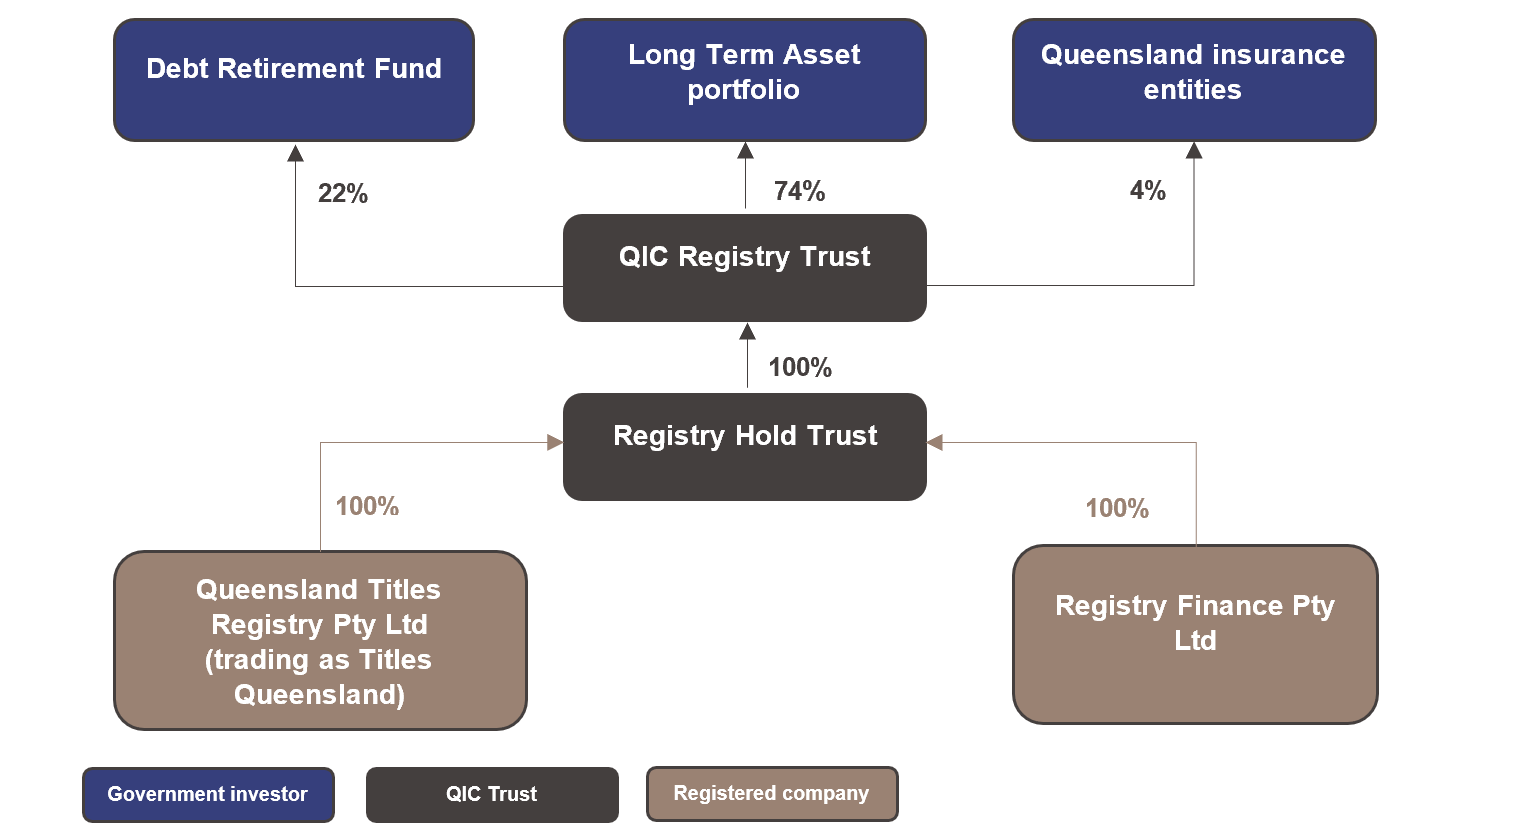 Overview of the investment structure of Queensland Titles Registry